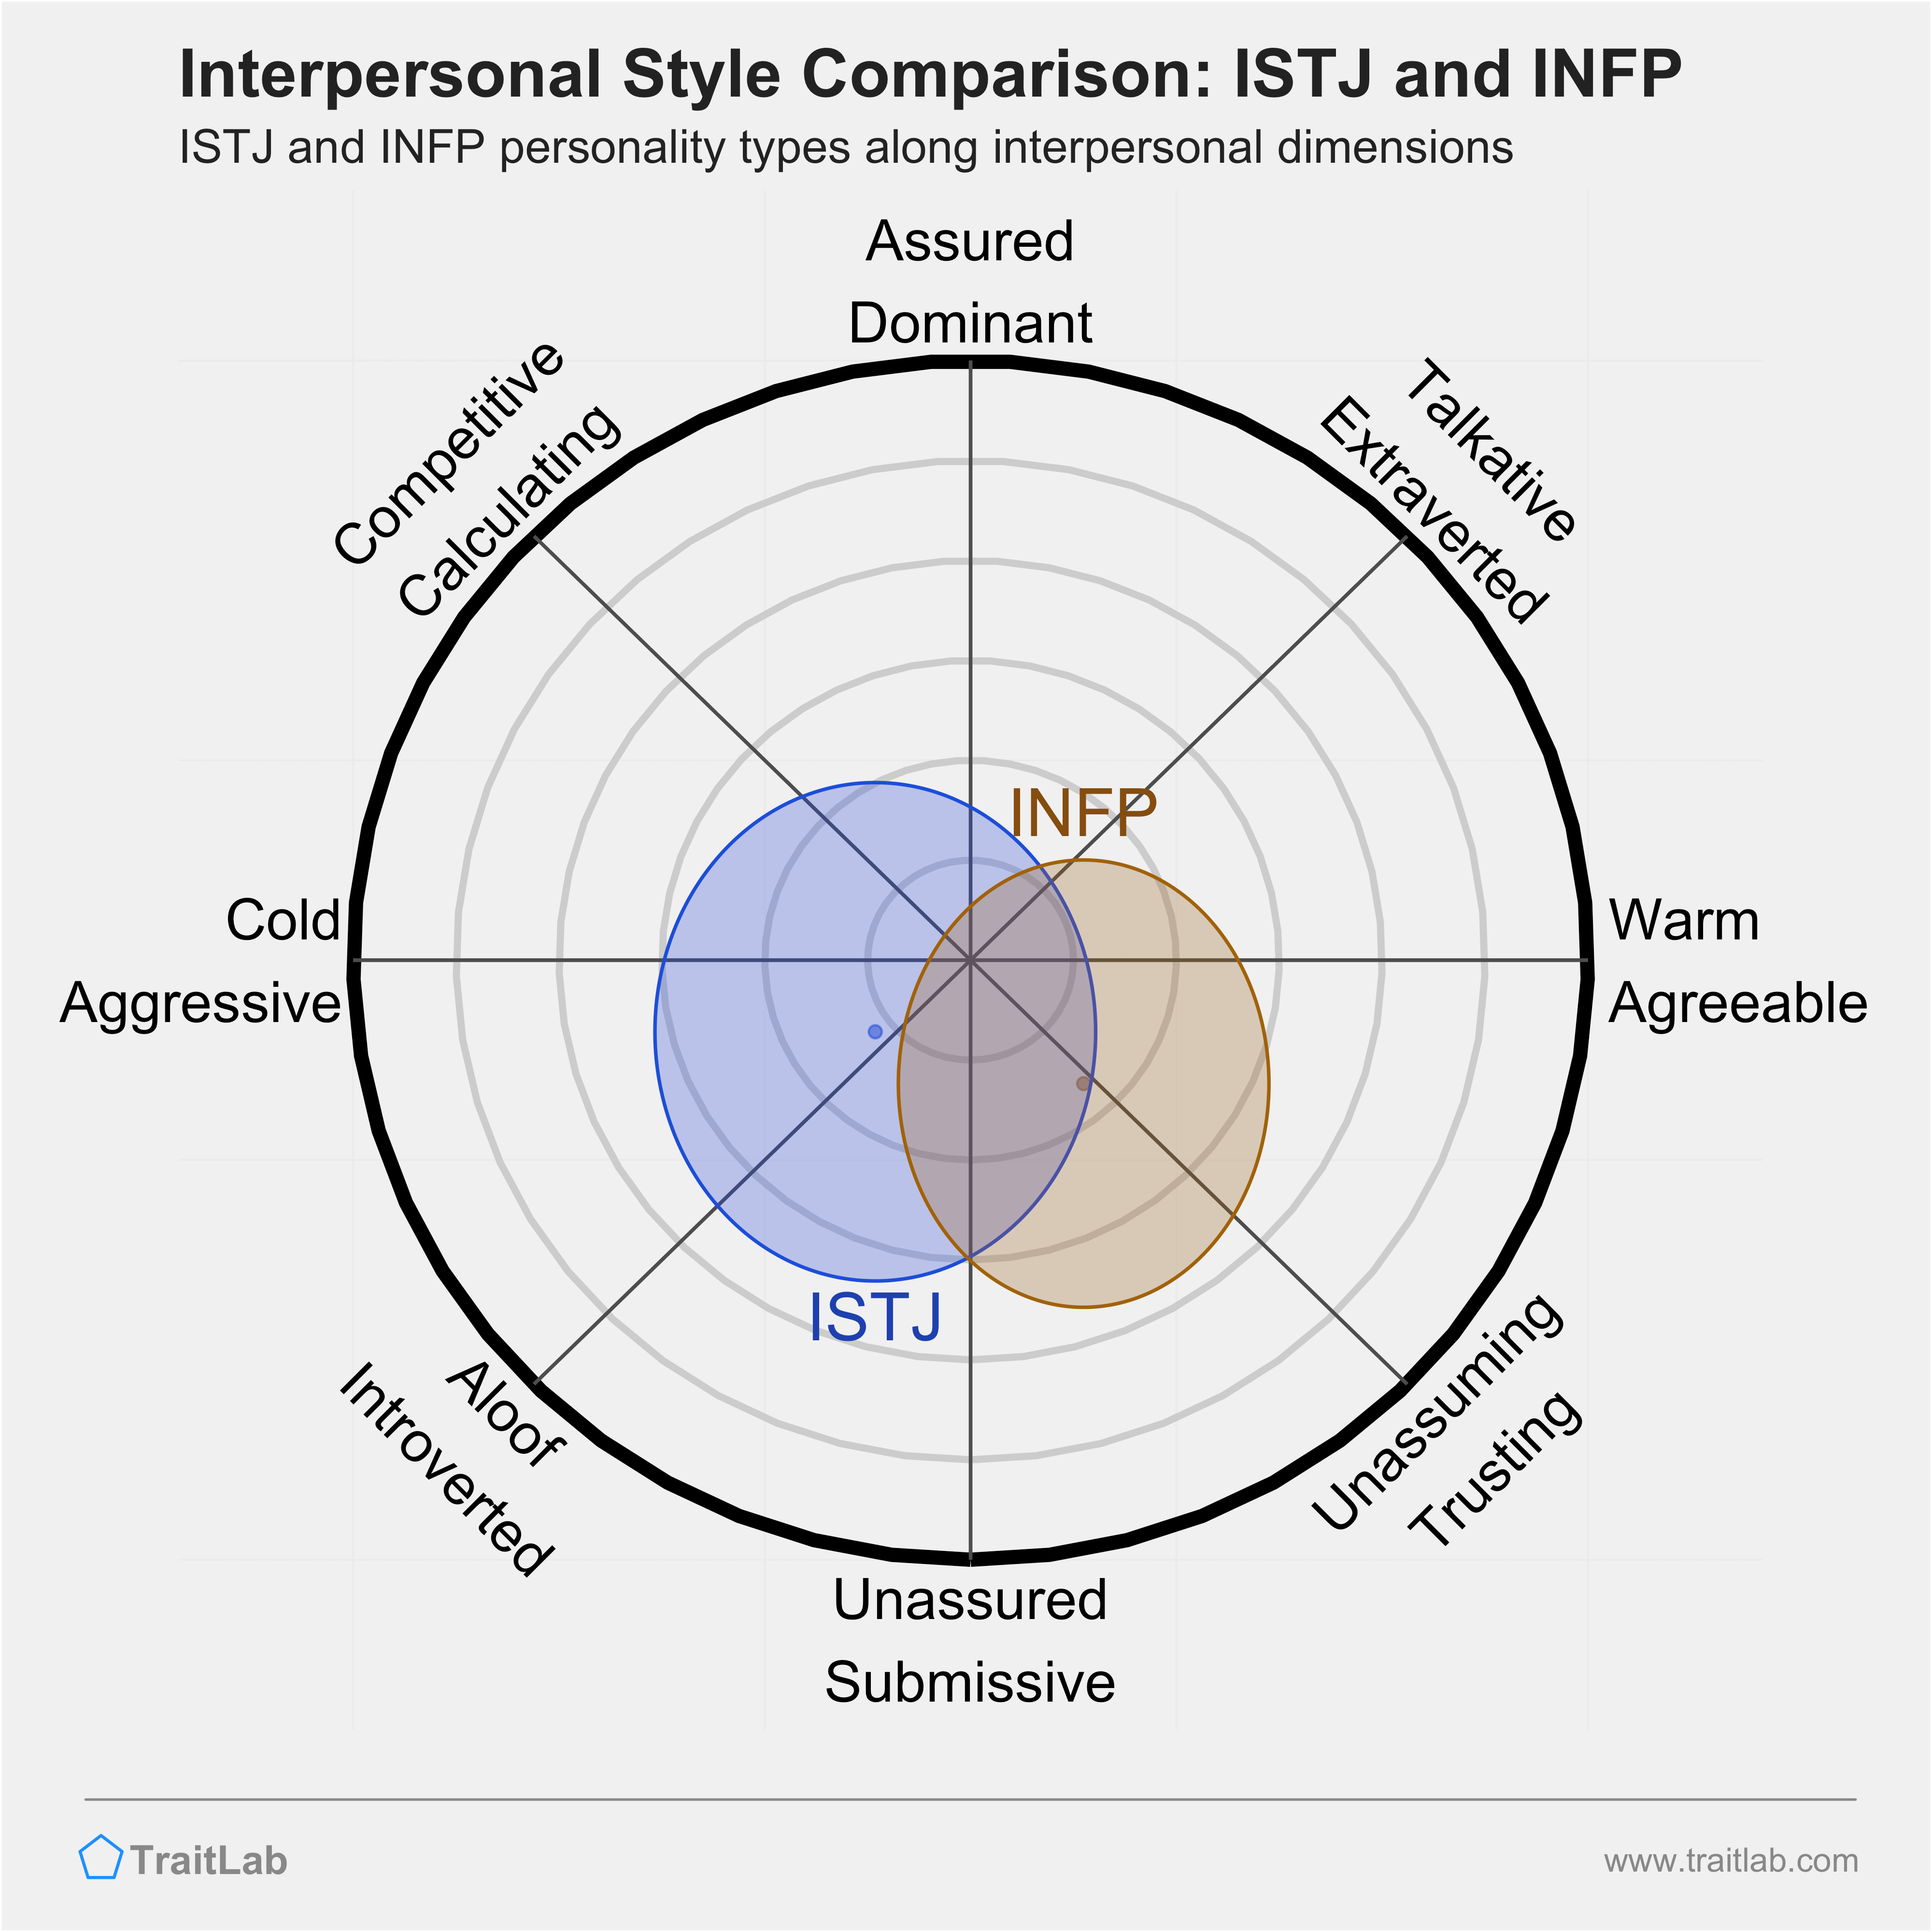 ISTJ and INFP comparison across interpersonal dimensions